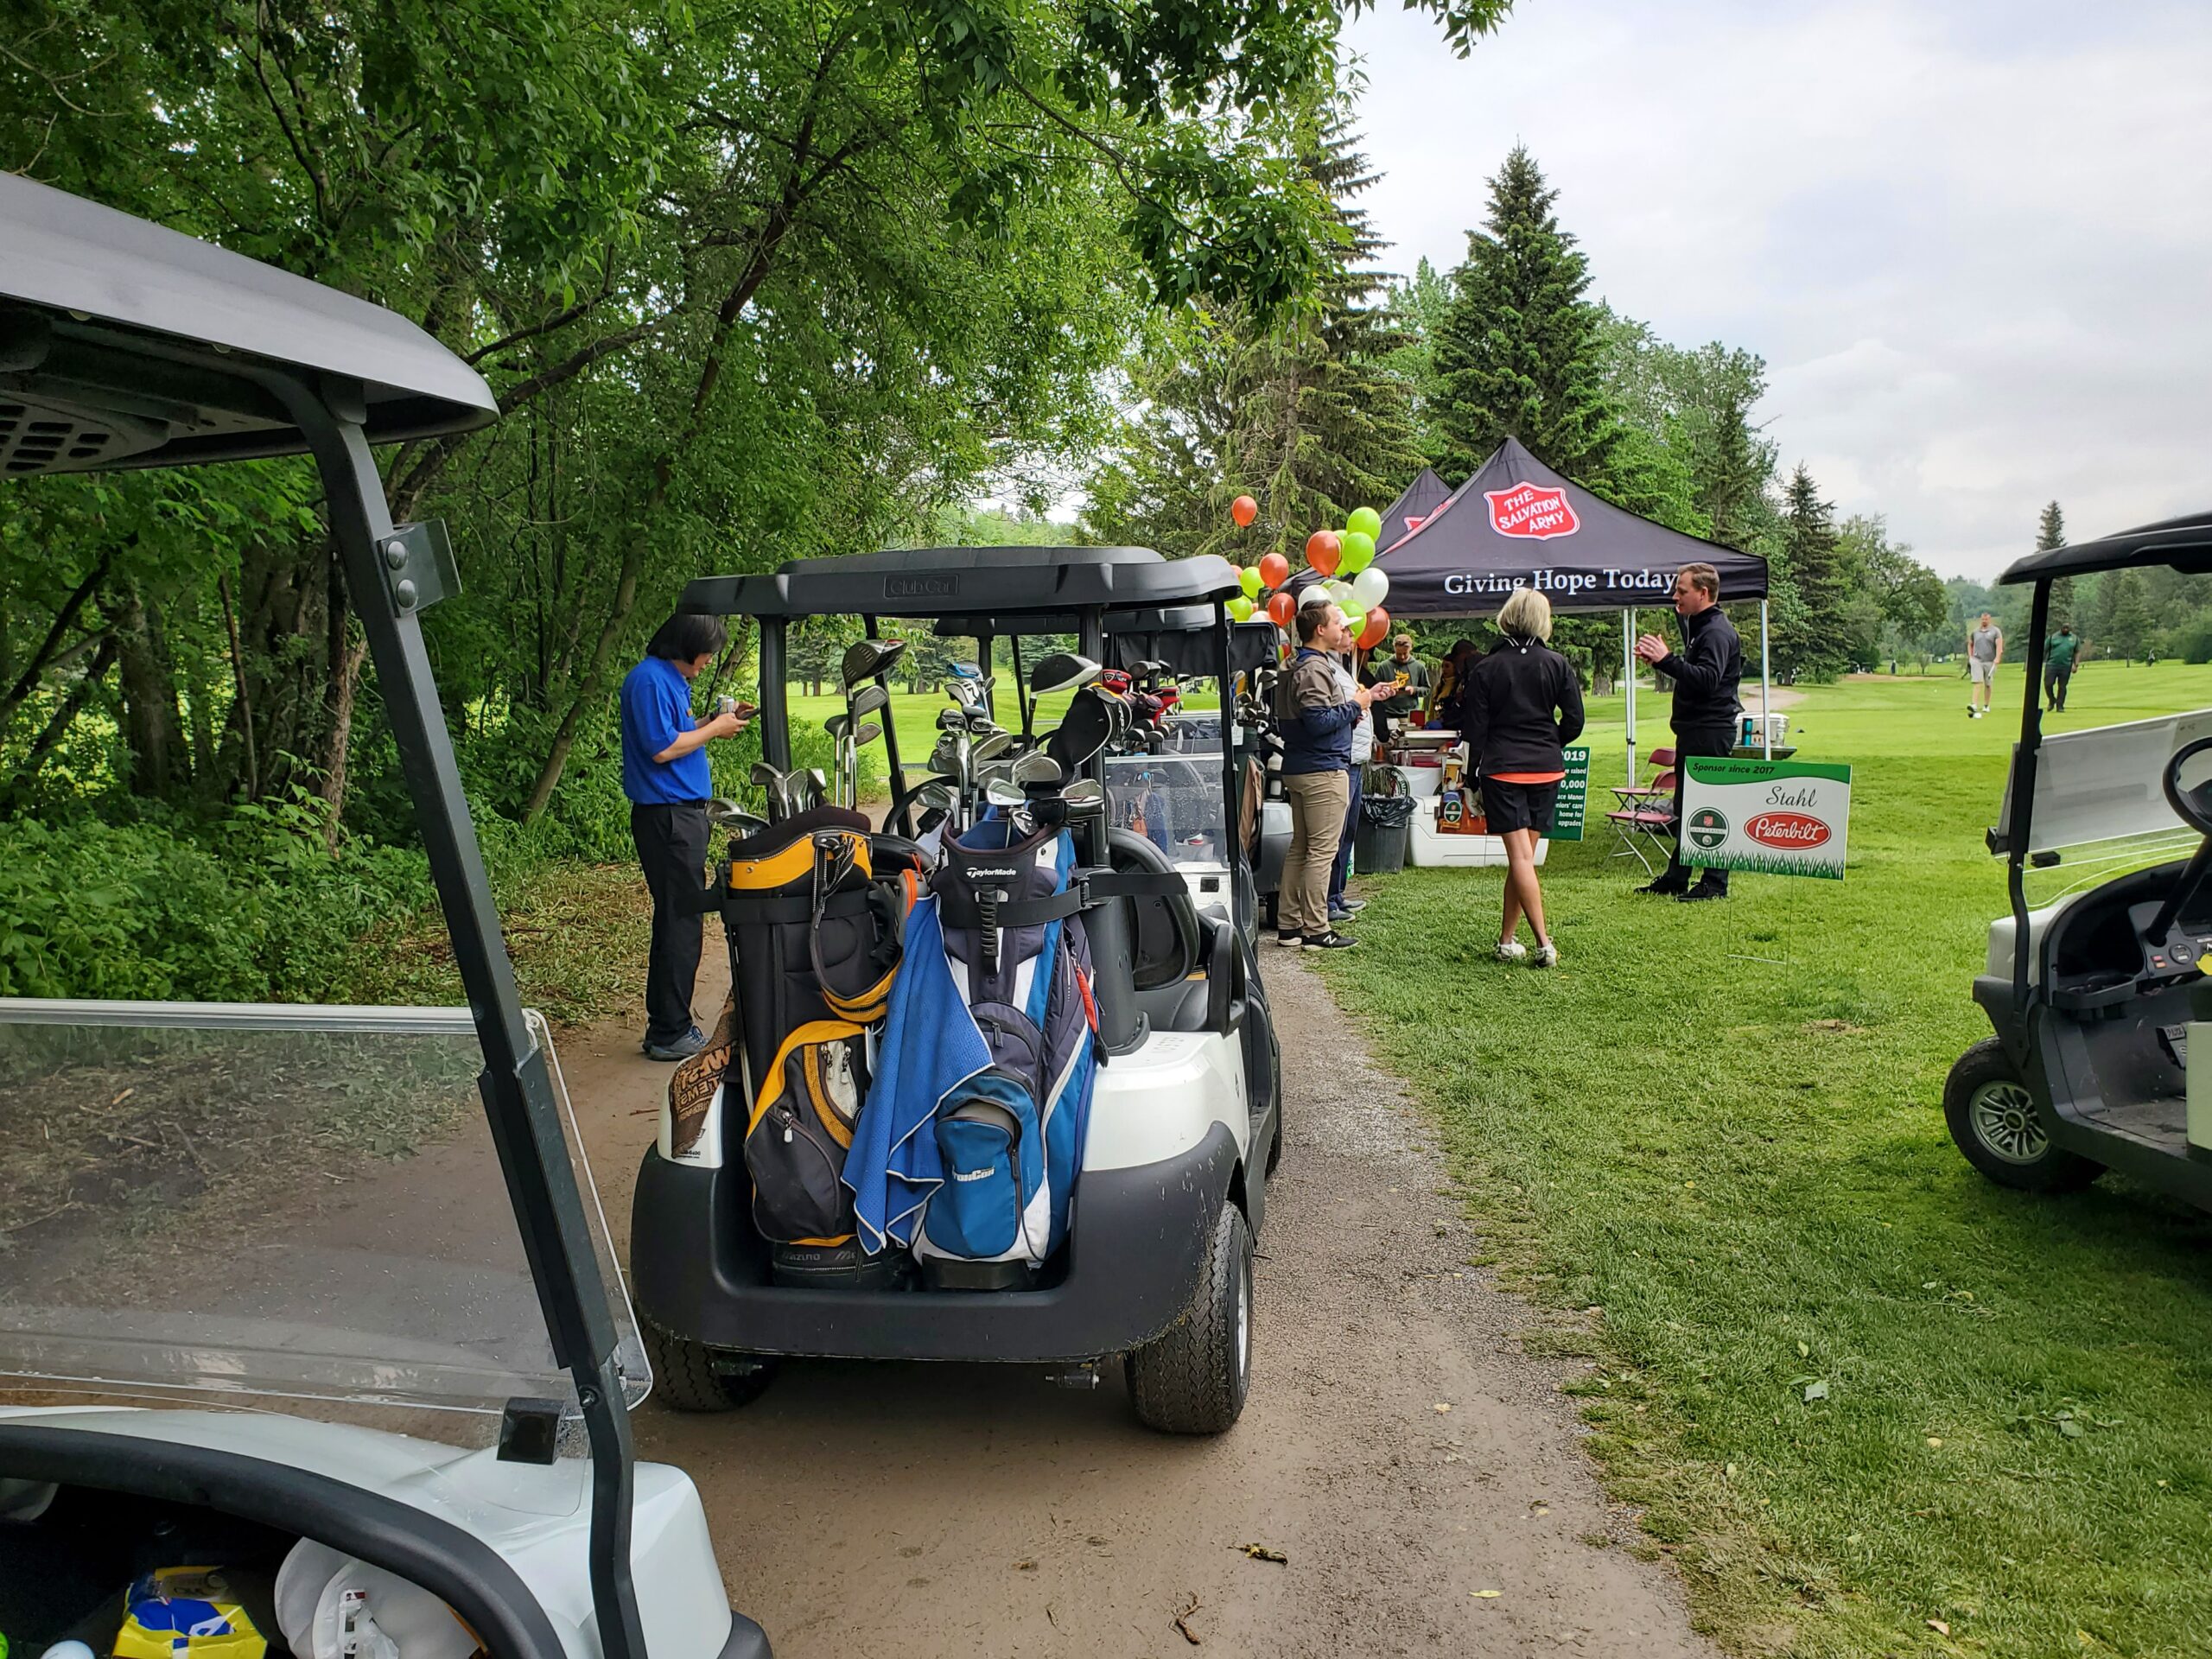 20th anniversary of the Supreme Group Salvation ARmy Golf Classic in Edmonton